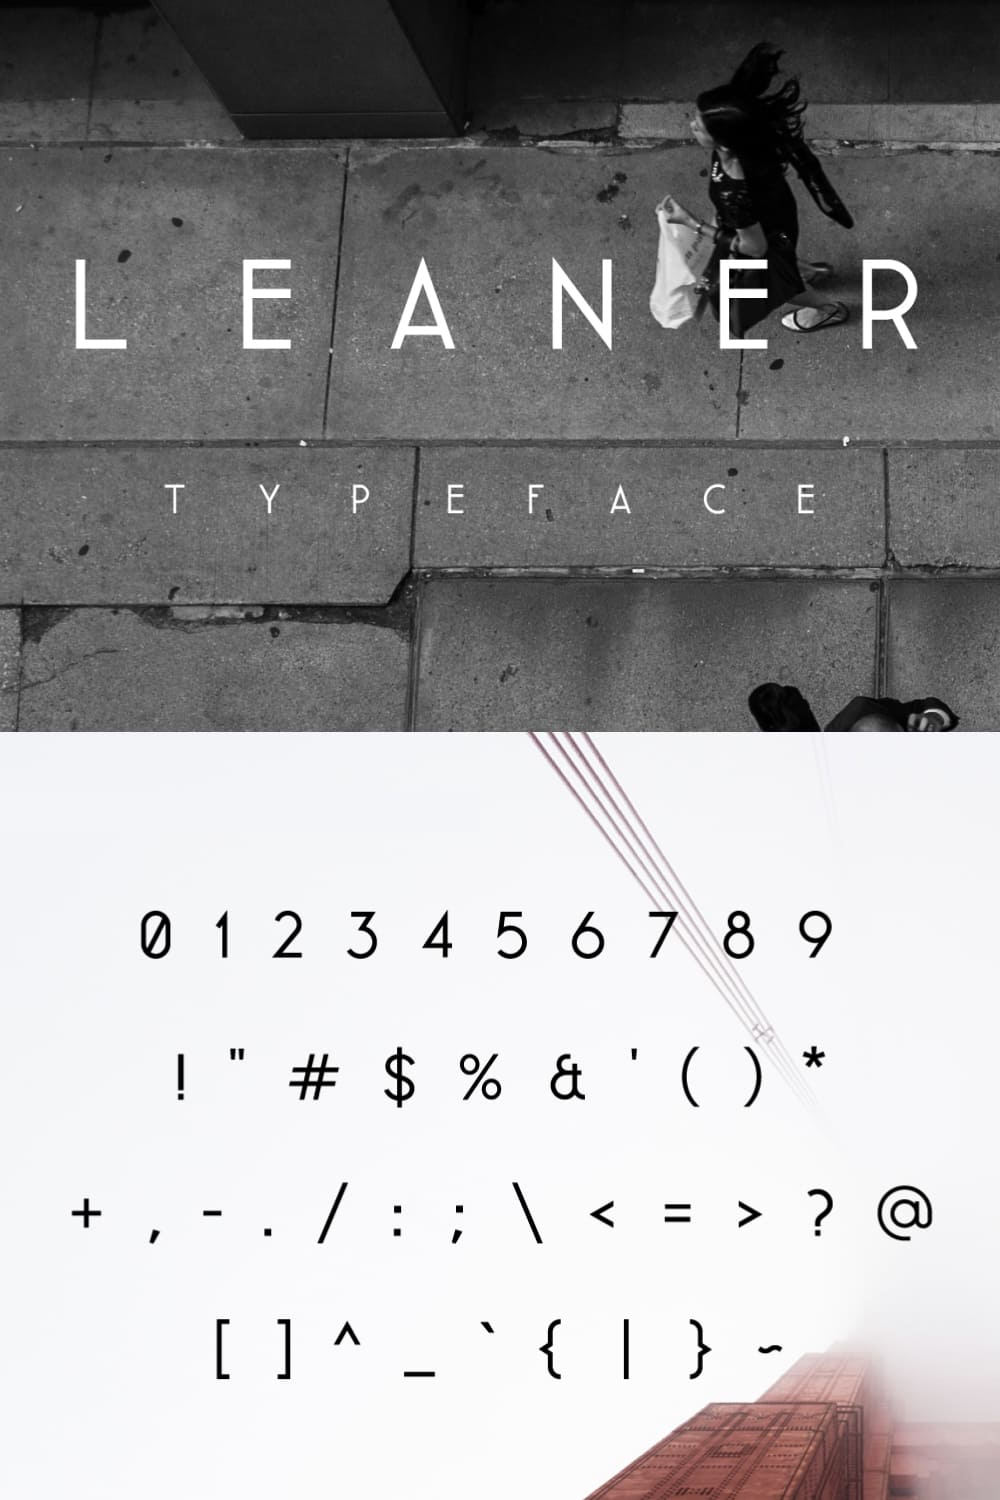 An example of a font in white and black on the background of photos.